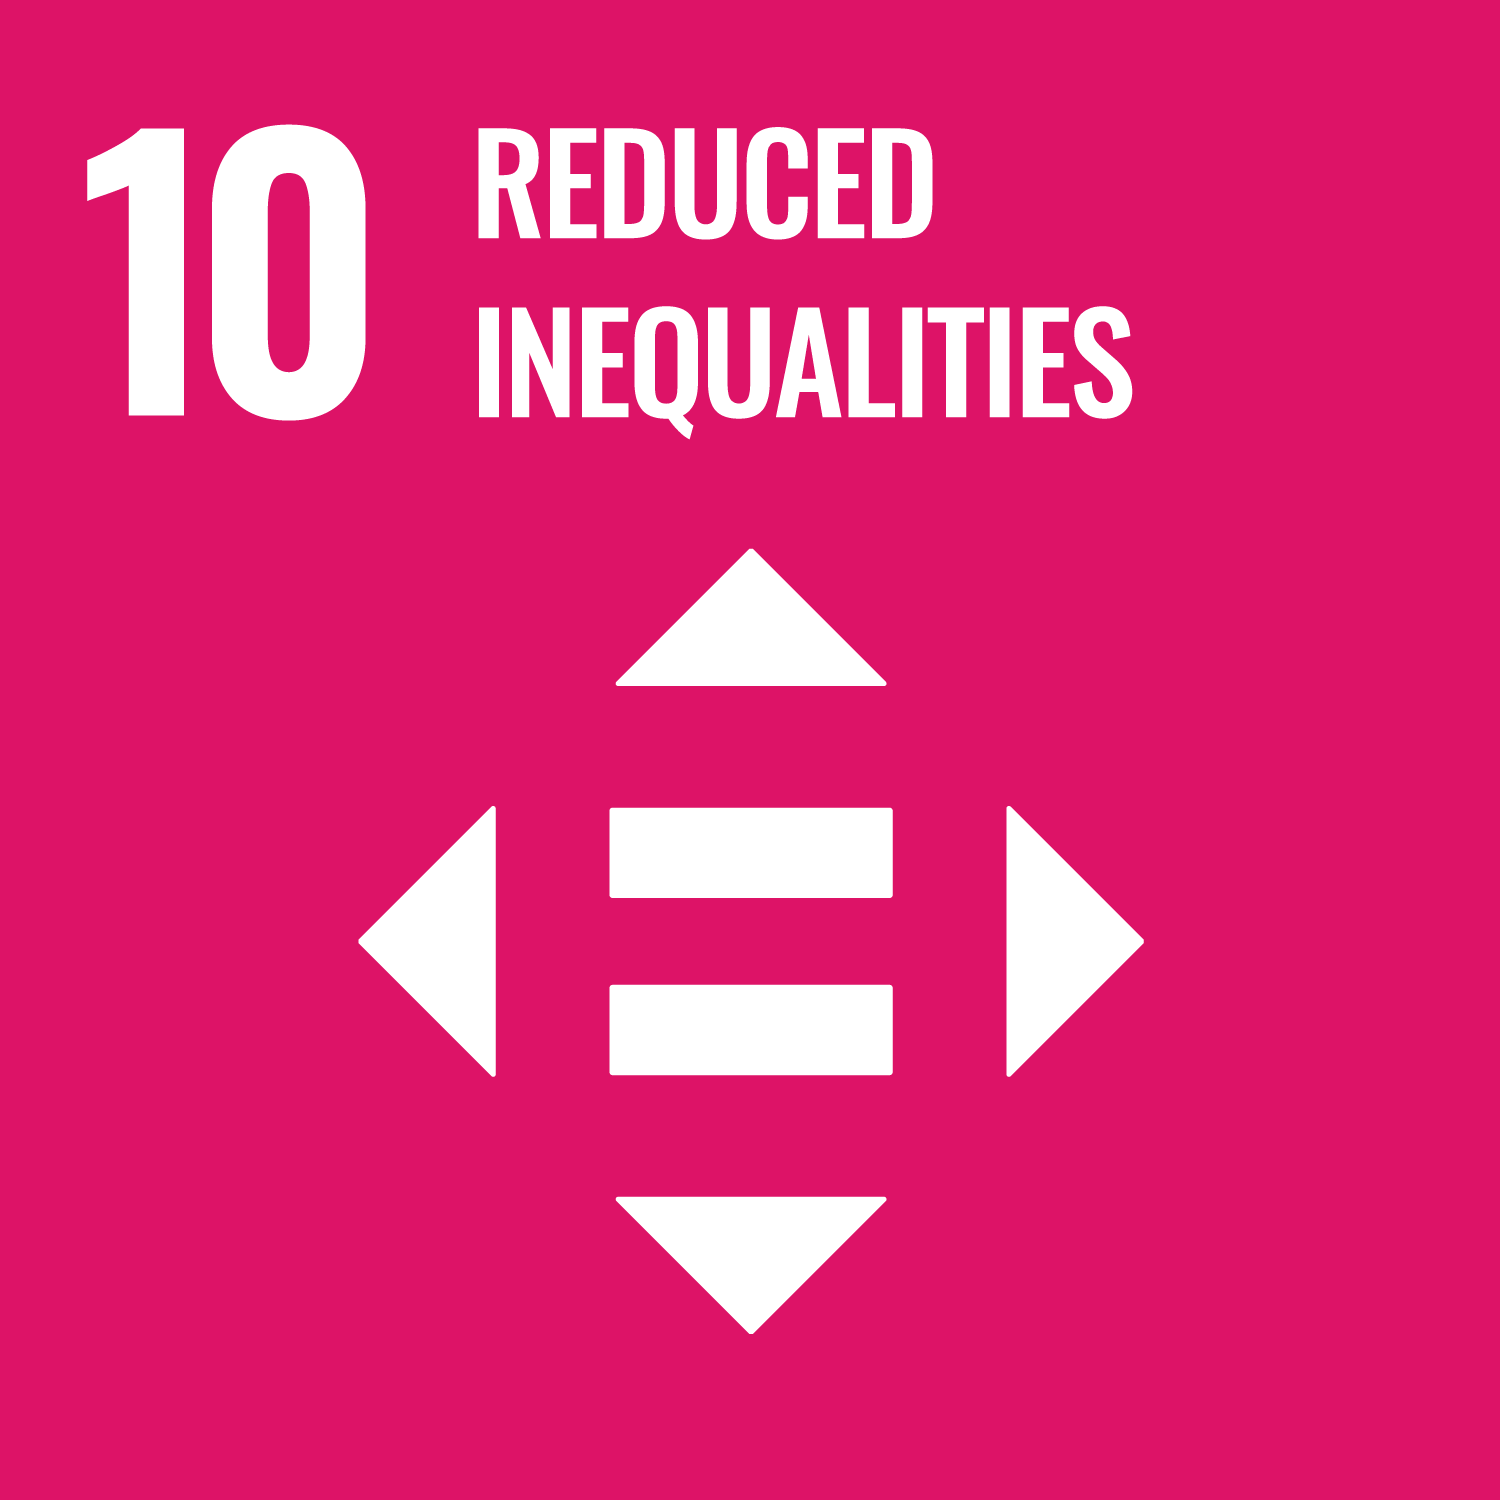 10: Reduced Inequality